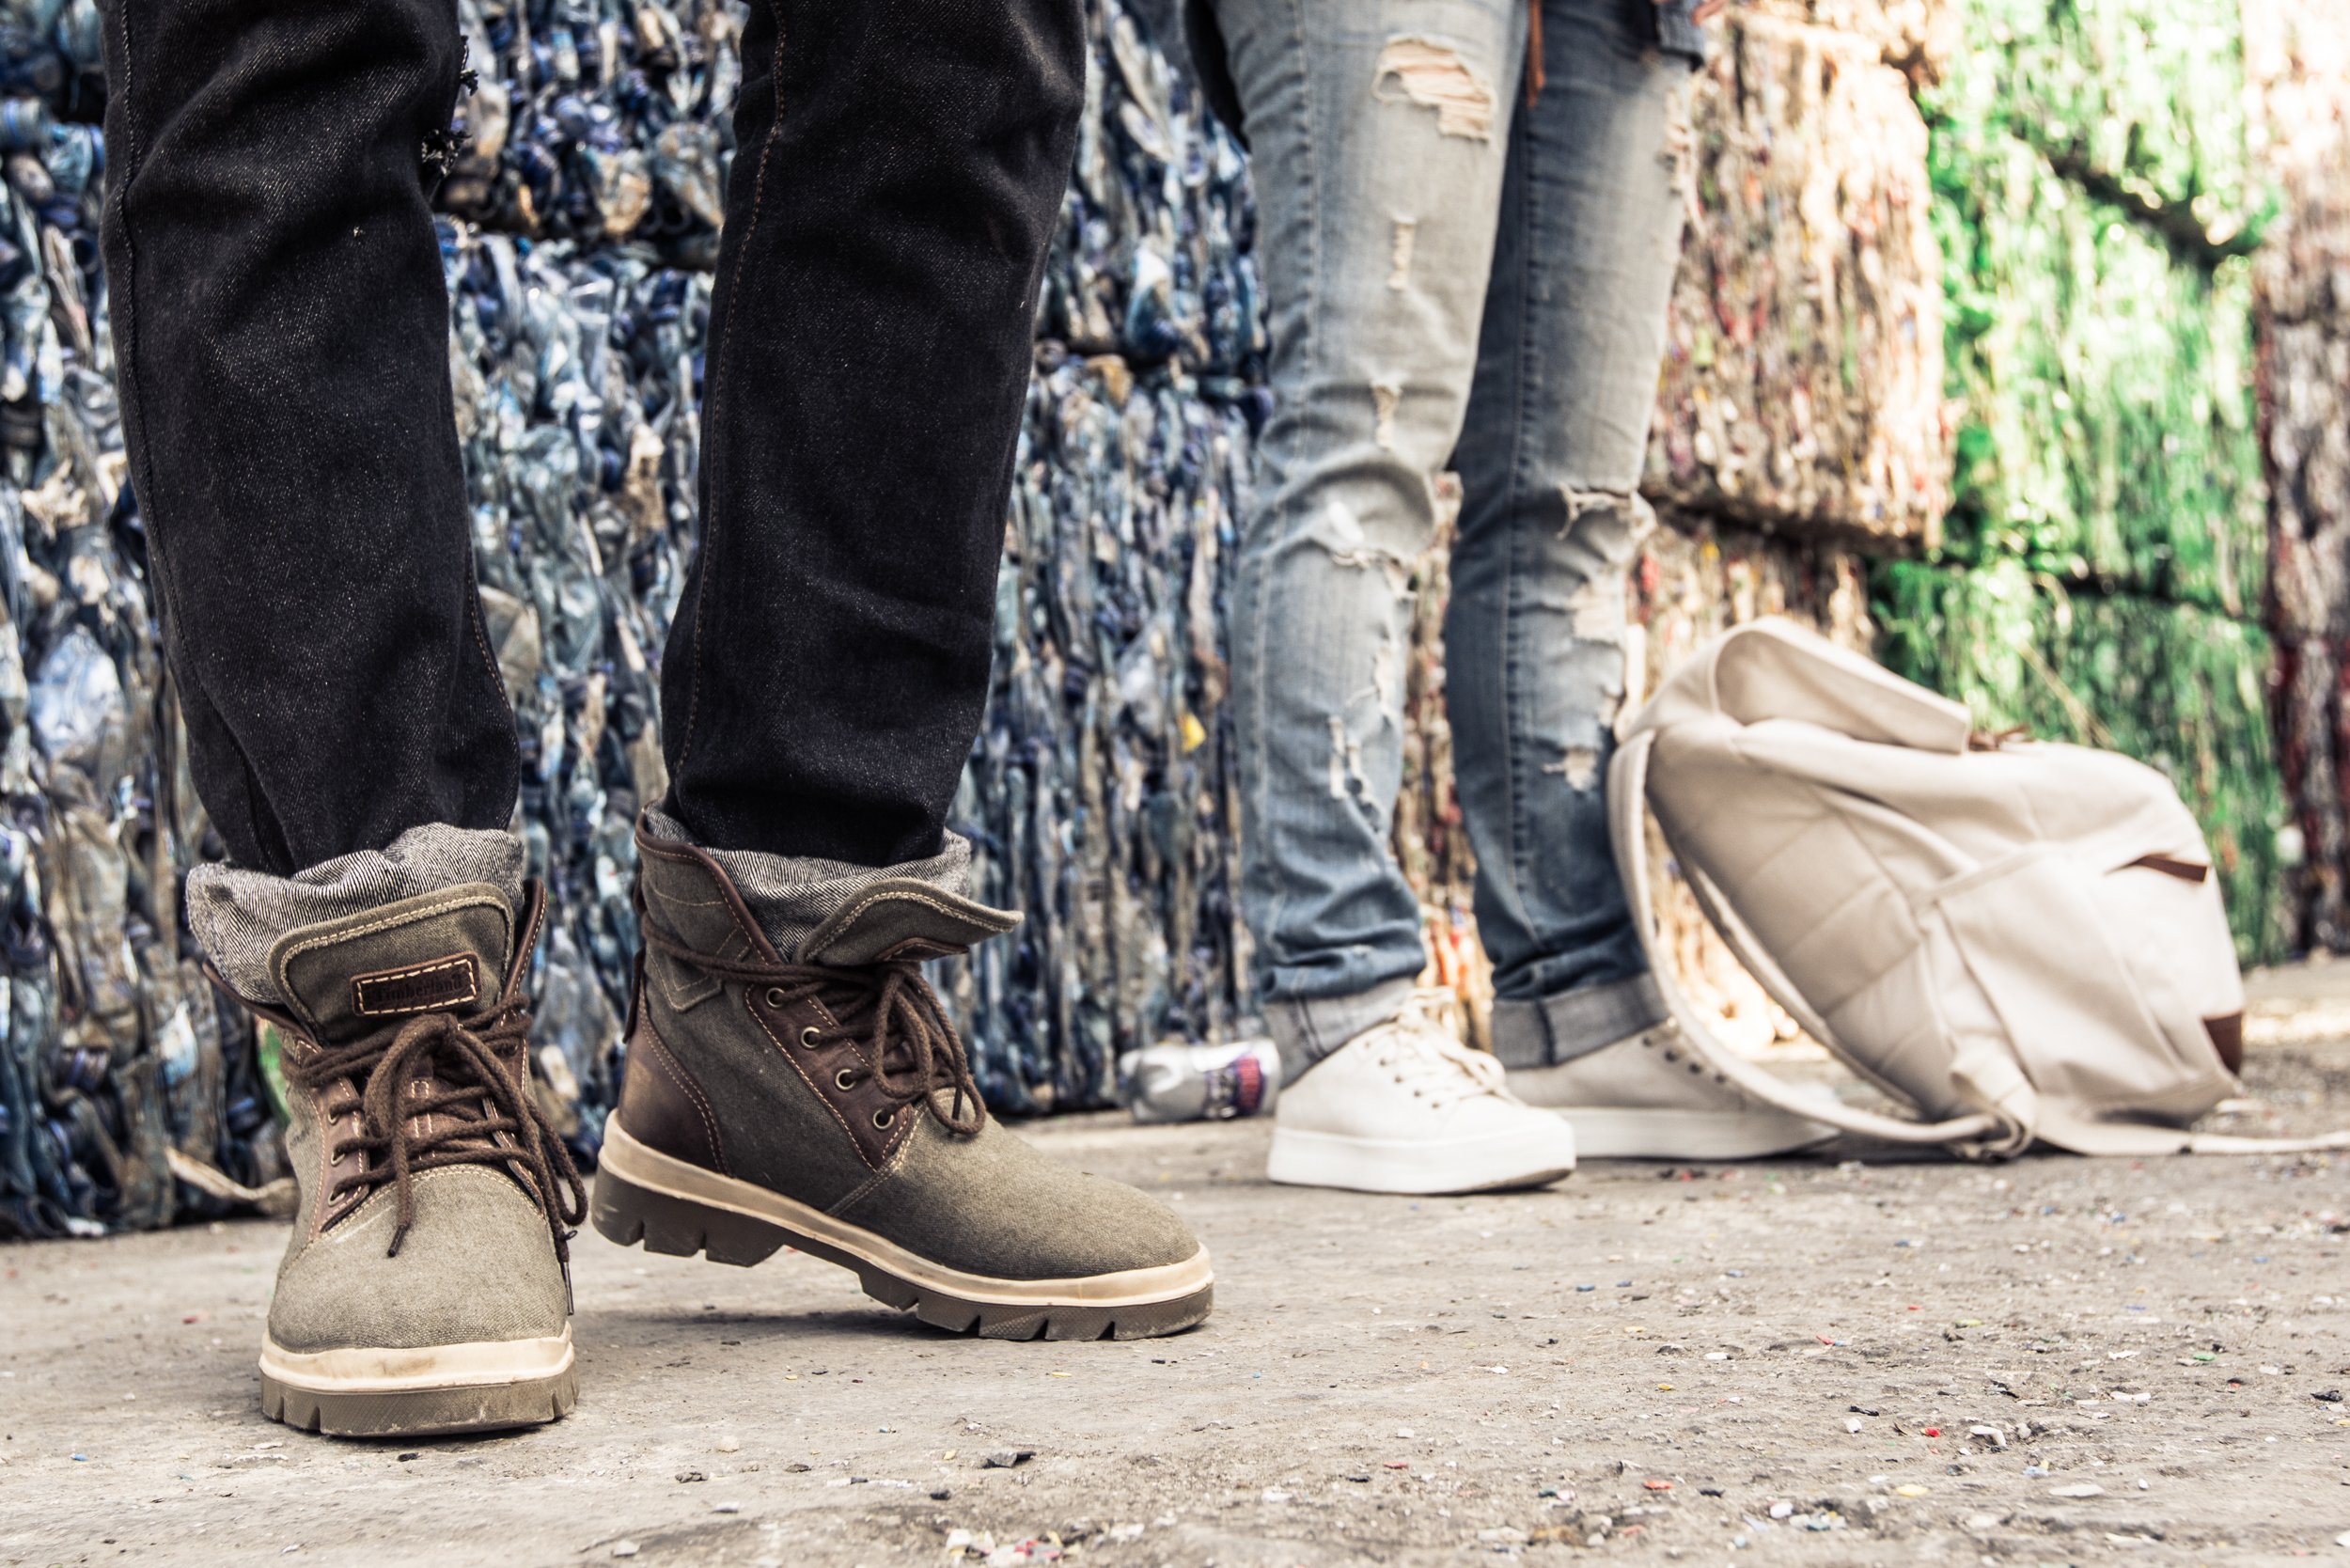 Uitgraving Snor Geleerde Timberland on Twitter: "#TimberlandxThread products, like the City Blazer  have led to 765,280 plastic bottles being recycled in Haiti. .  https://t.co/3ZqIeAn3kh https://t.co/zhDvjojAGQ" / Twitter